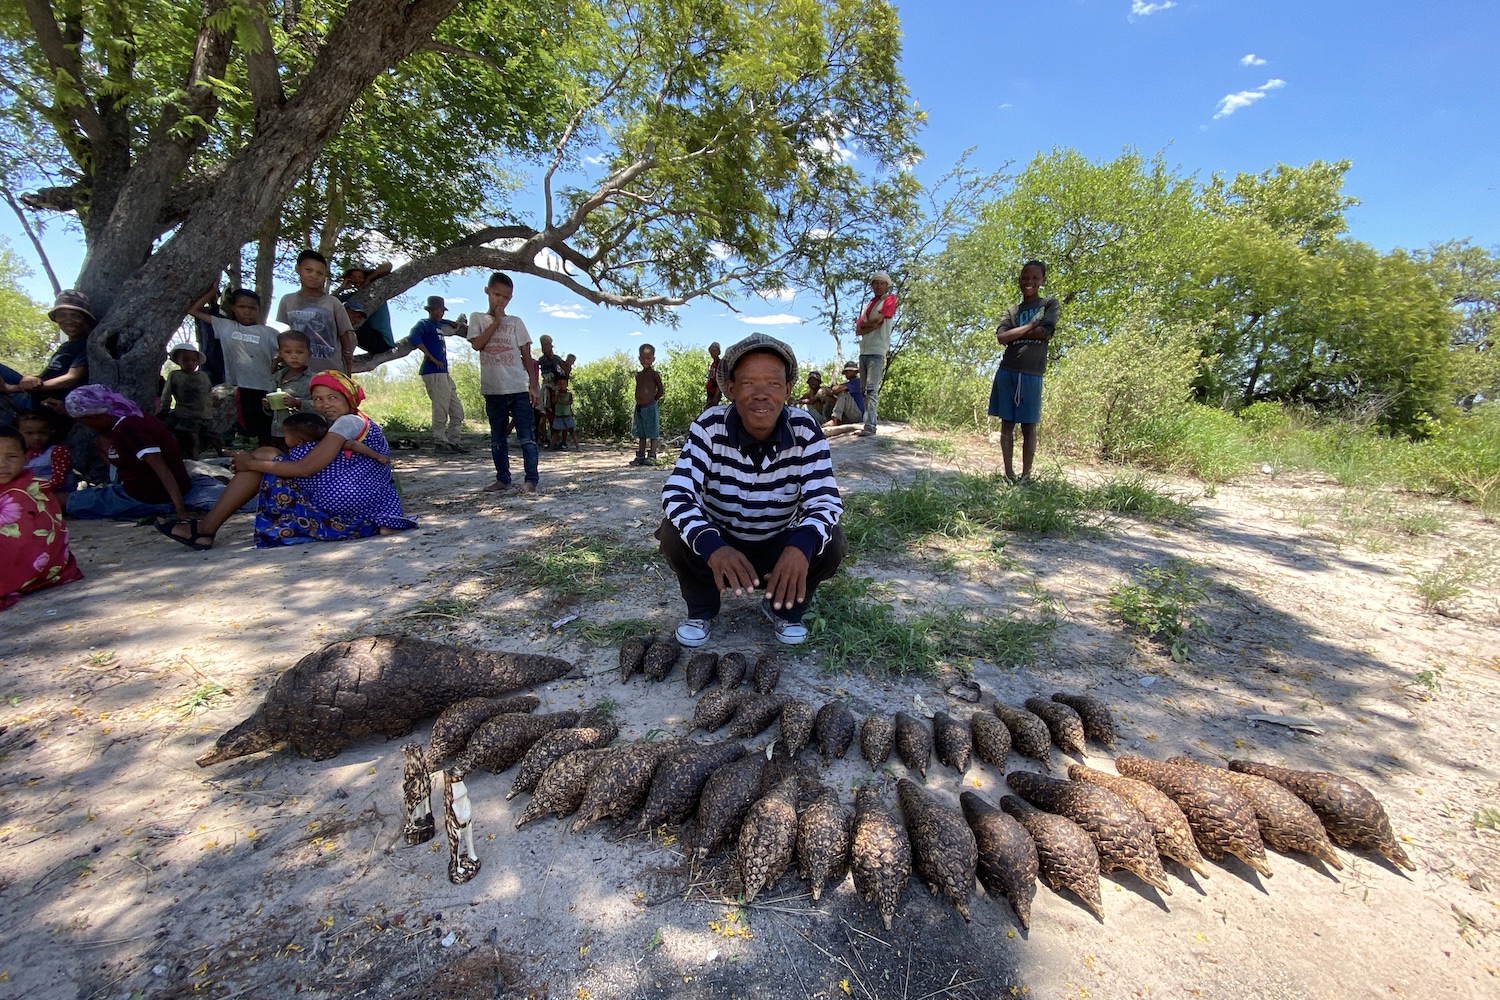 A San craftsman sits under a tree with a beautiful collection of wooden pangolins in front of him.